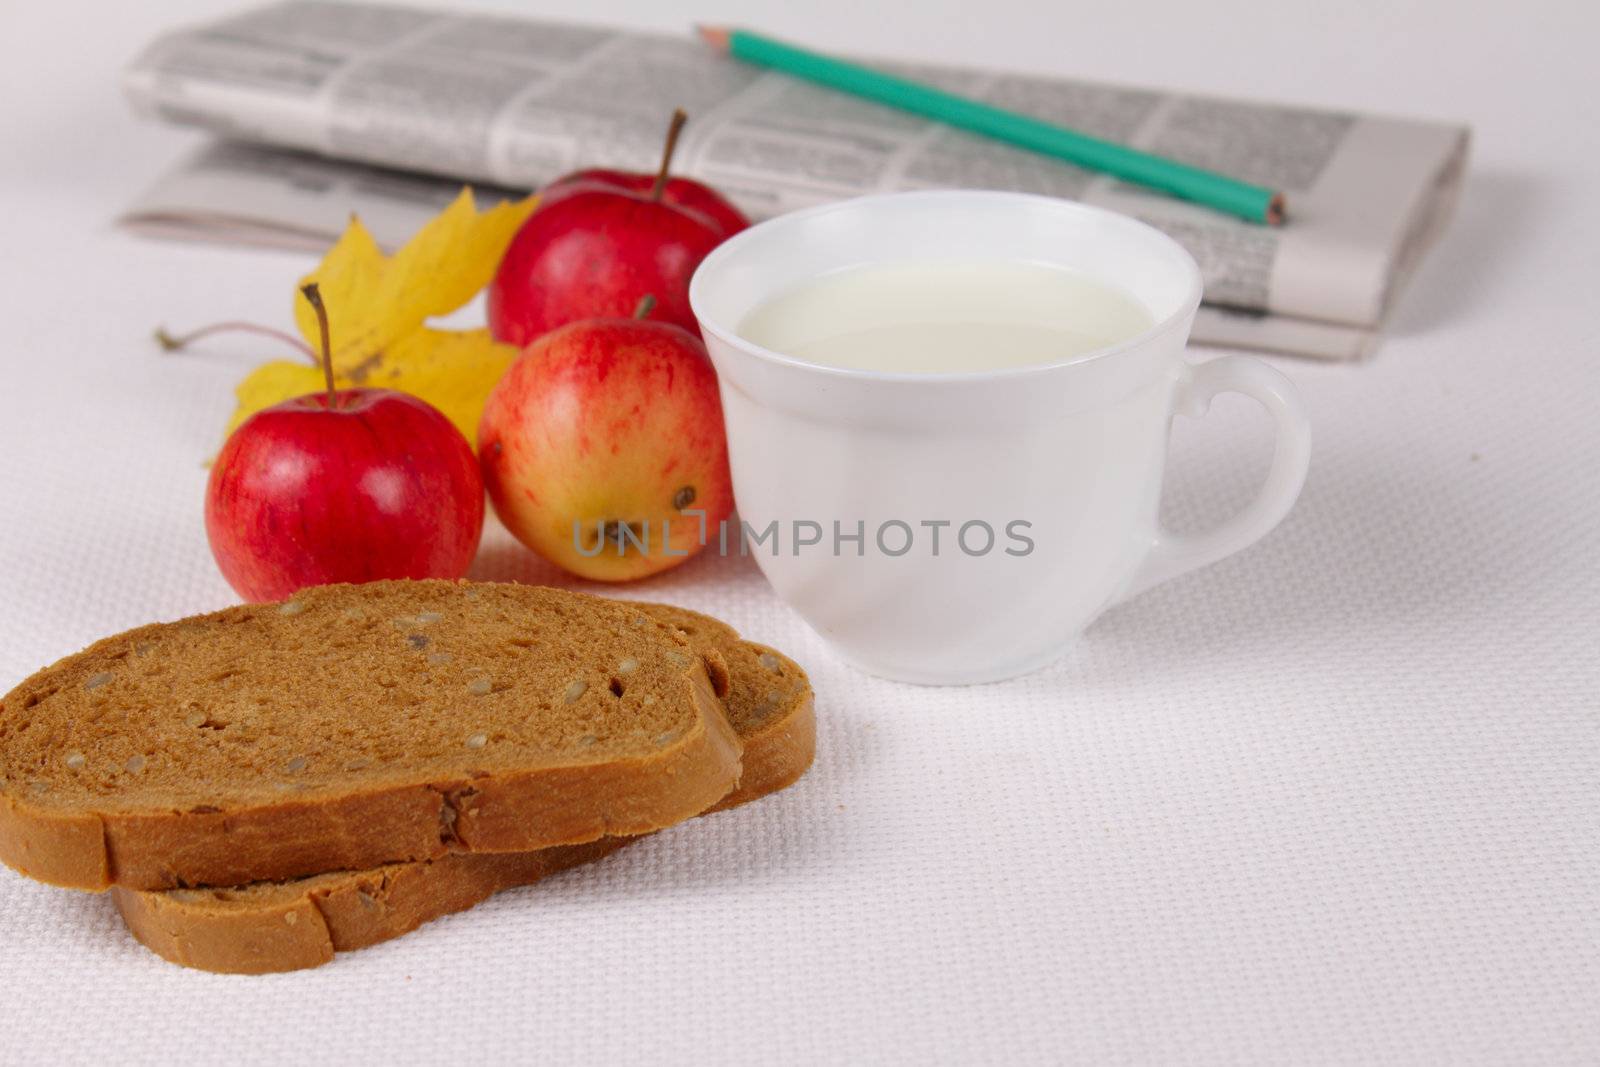 Bread with milk and apples against a morning paper removed close up